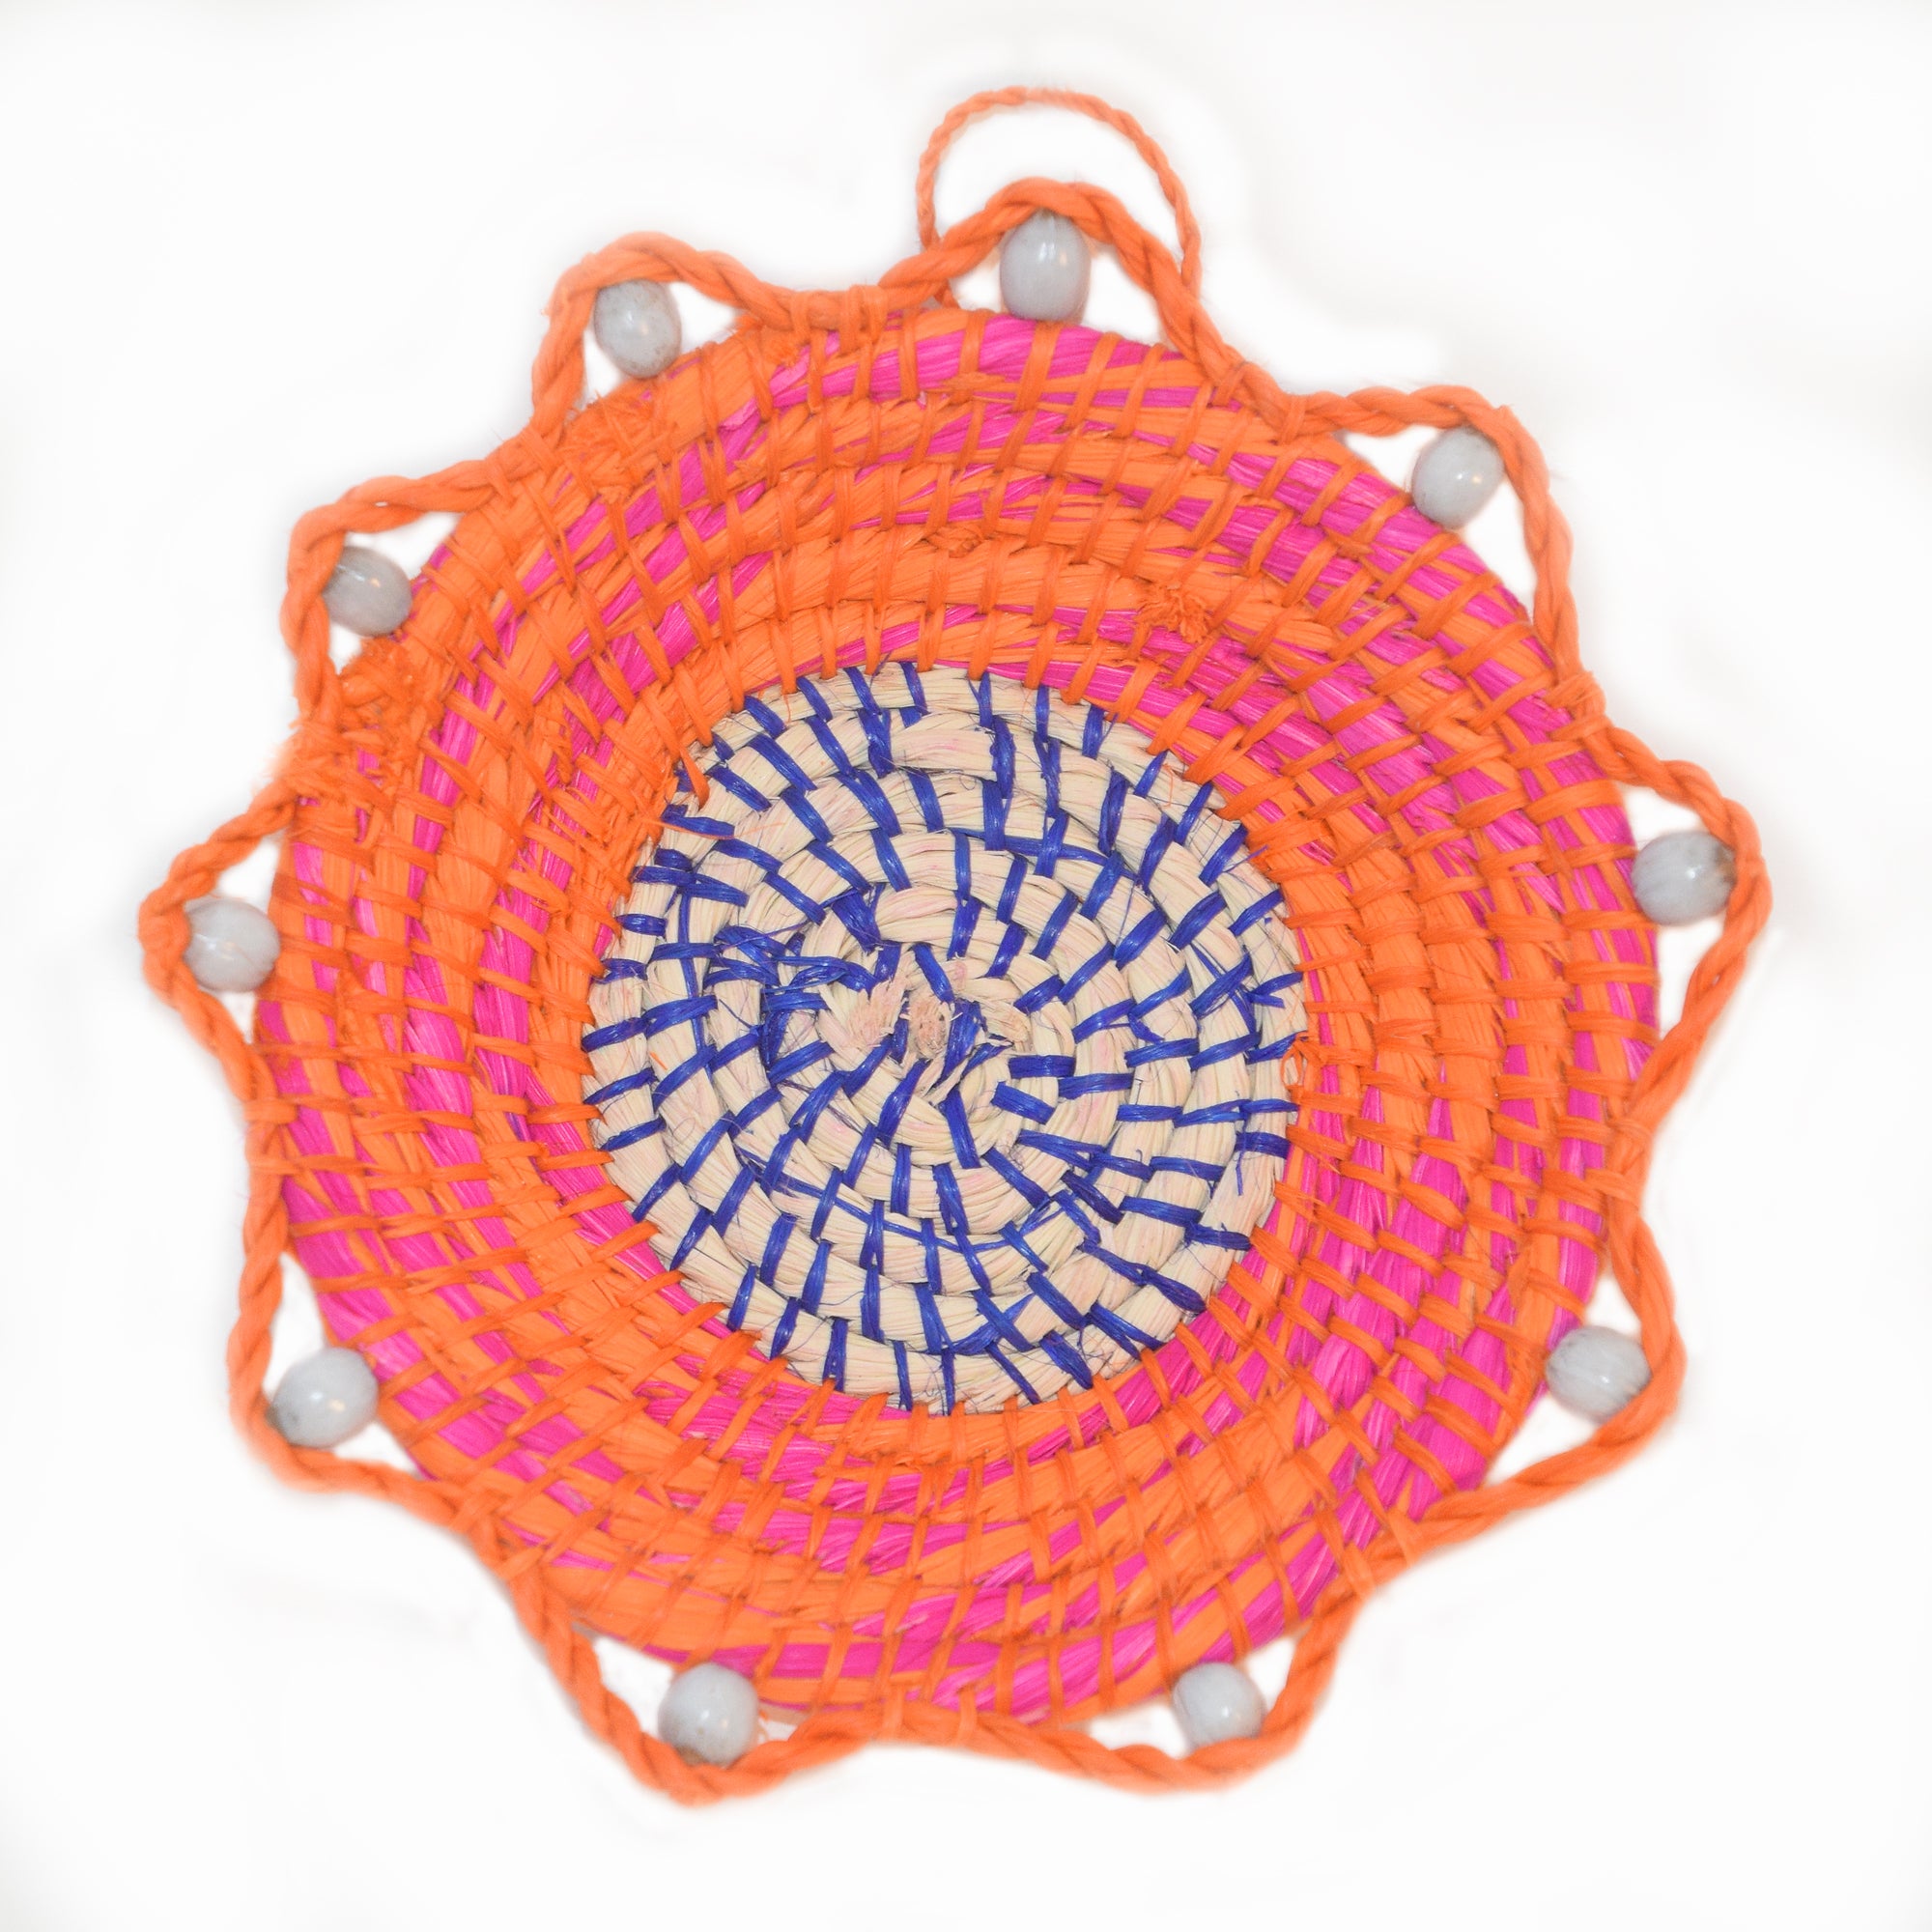 Colorful mini-basket and ornament - Handwoven by Amazon artisans from Peru